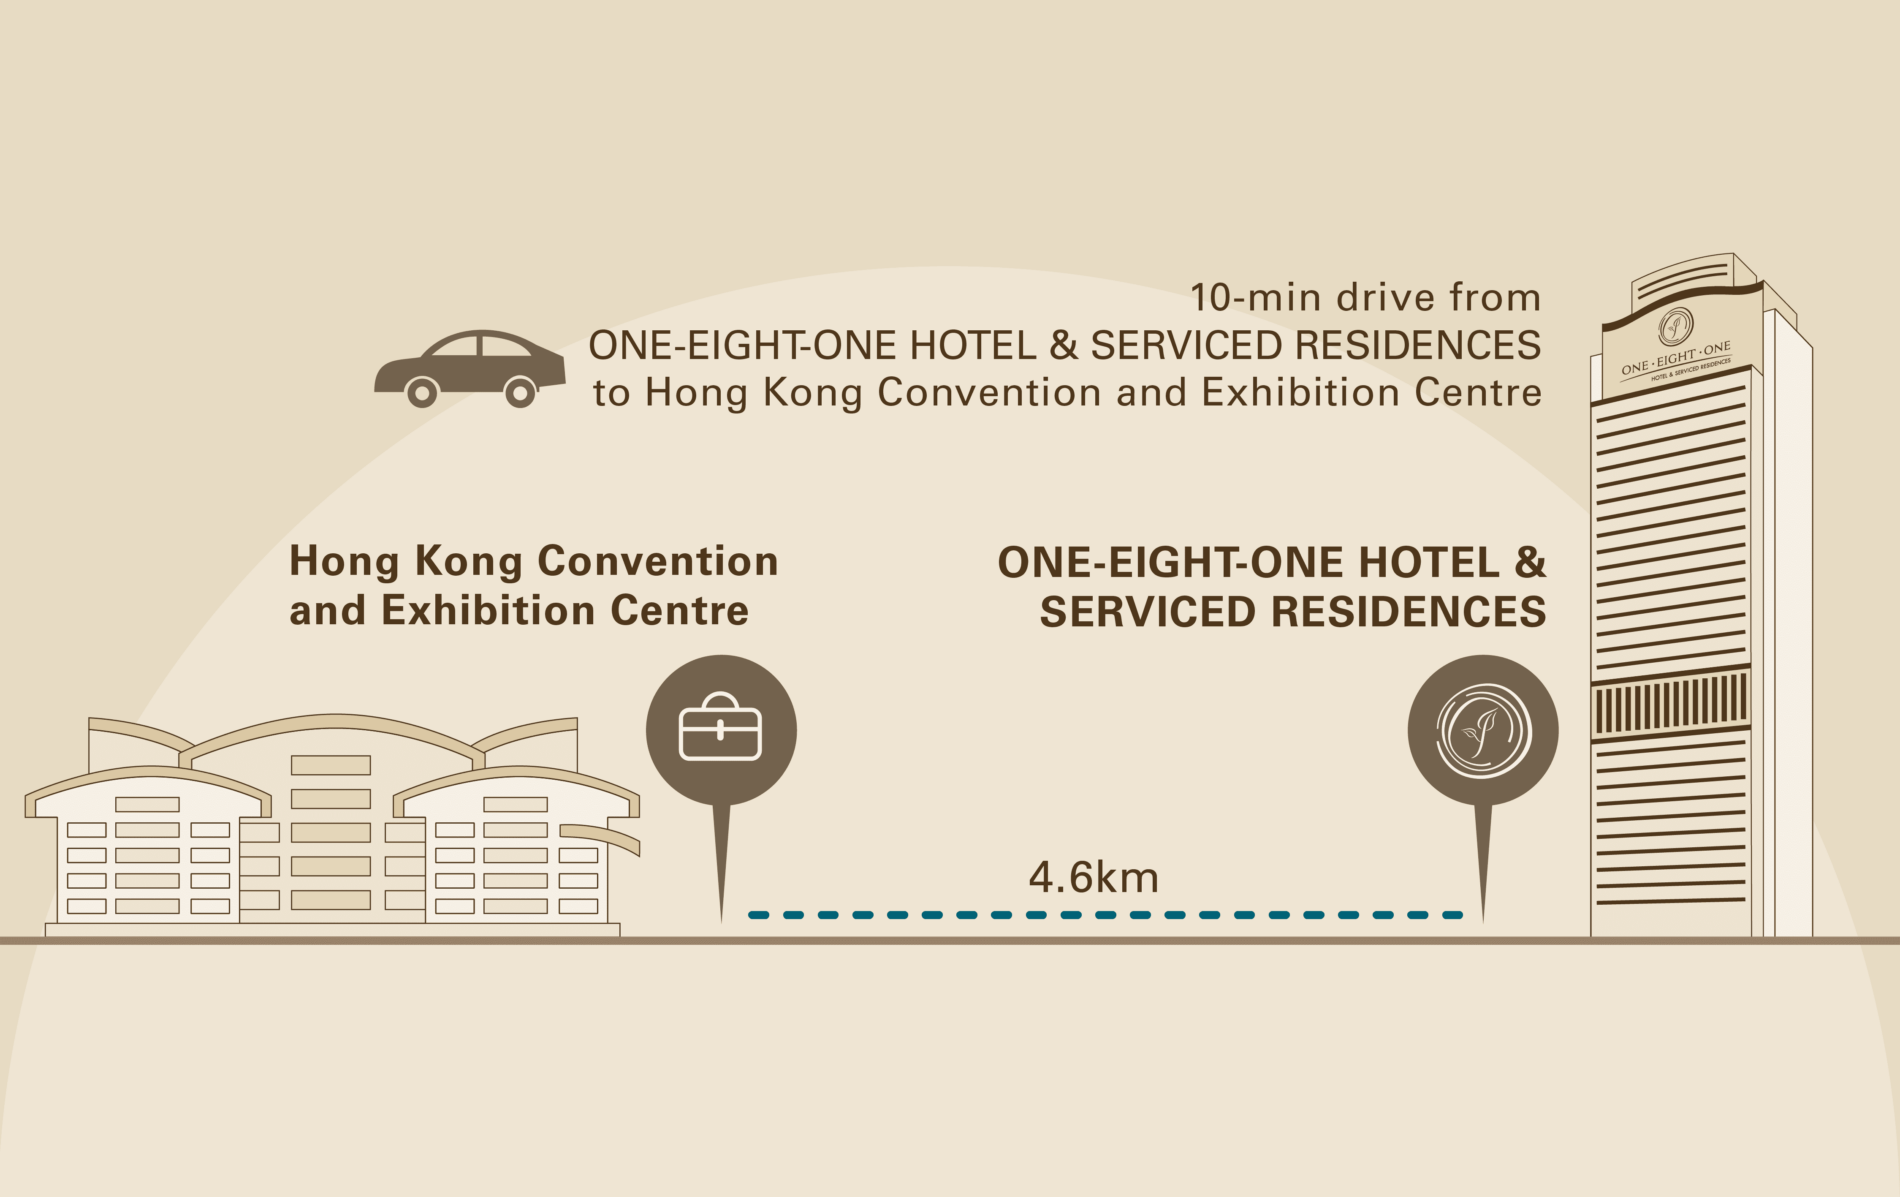 Transportation from One-Eight-One Hotel to the Hong Kong Convention and Exhibition Centre